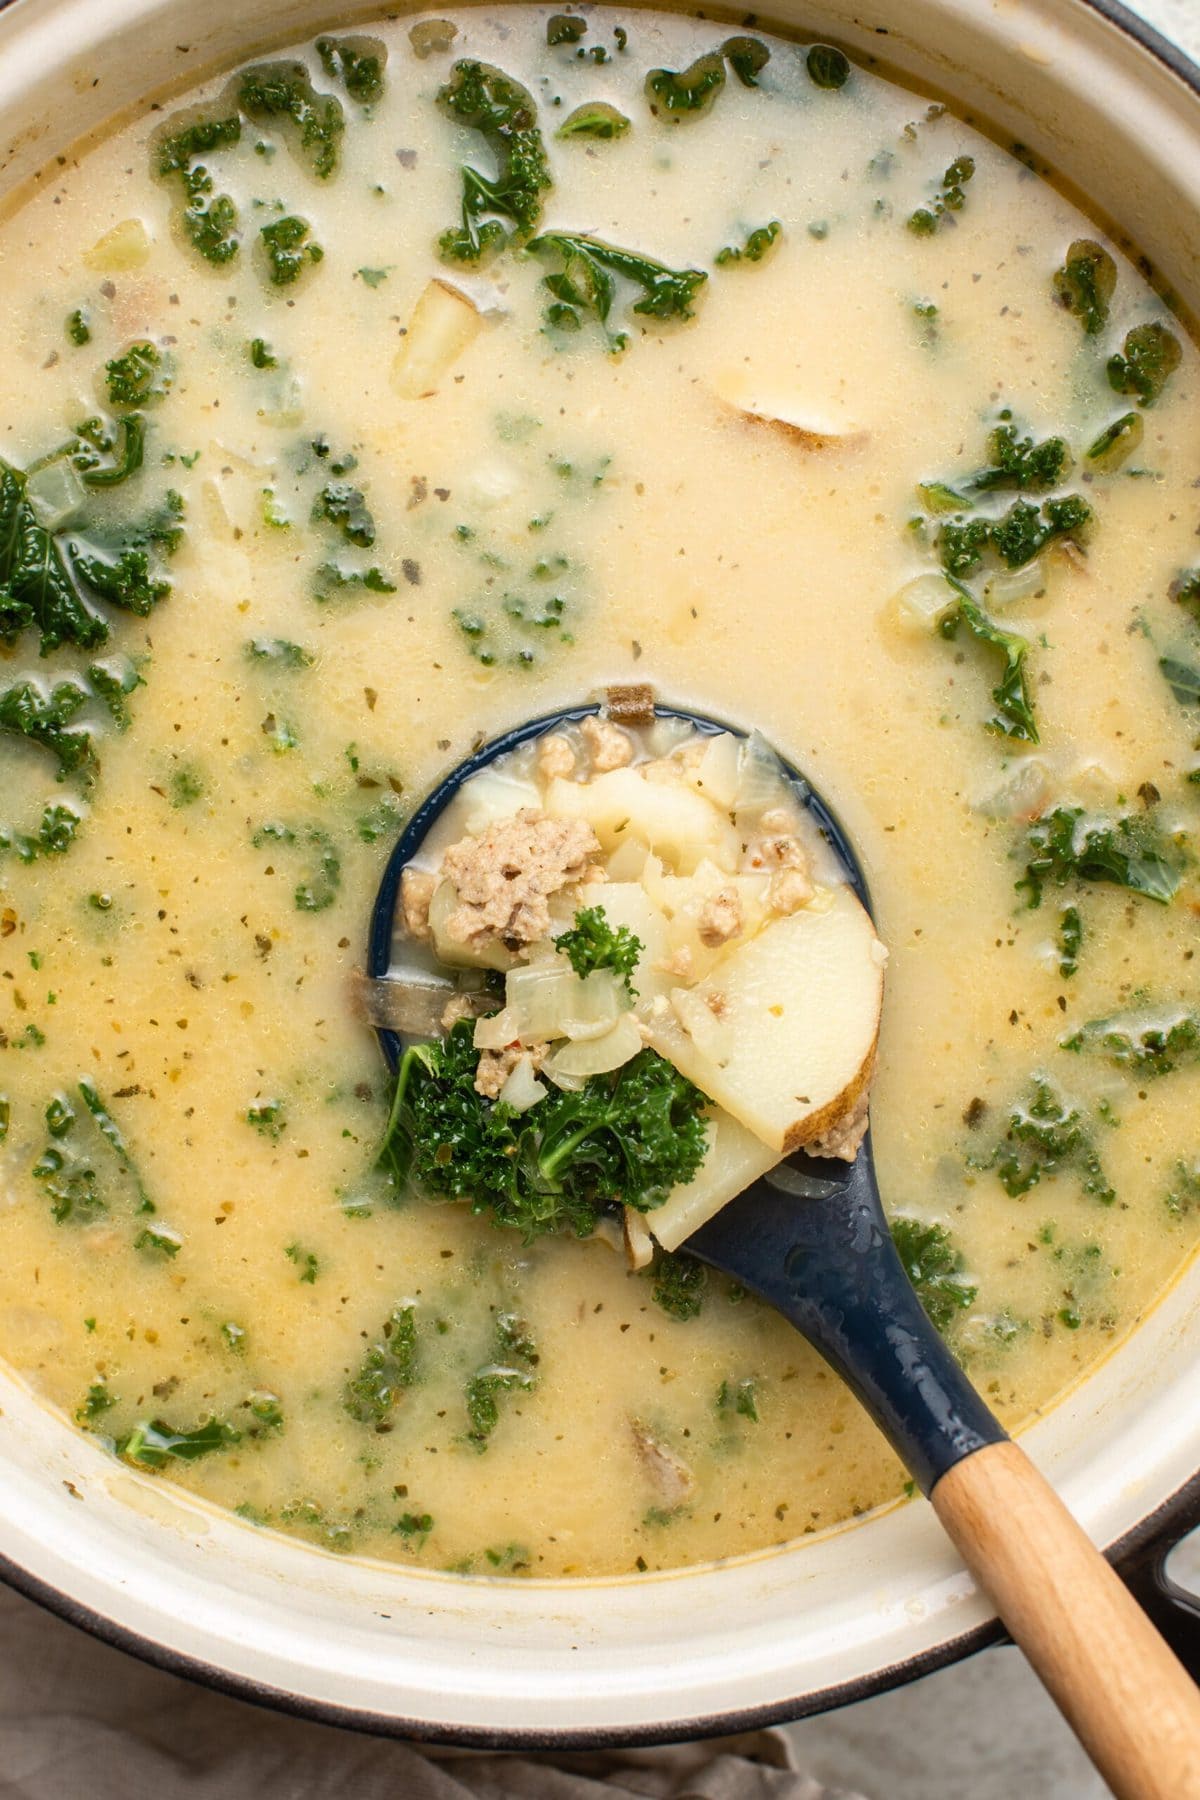 Cooked soup in large pot with spoon scooping out creamy broth, sausage, potatoes, and kale